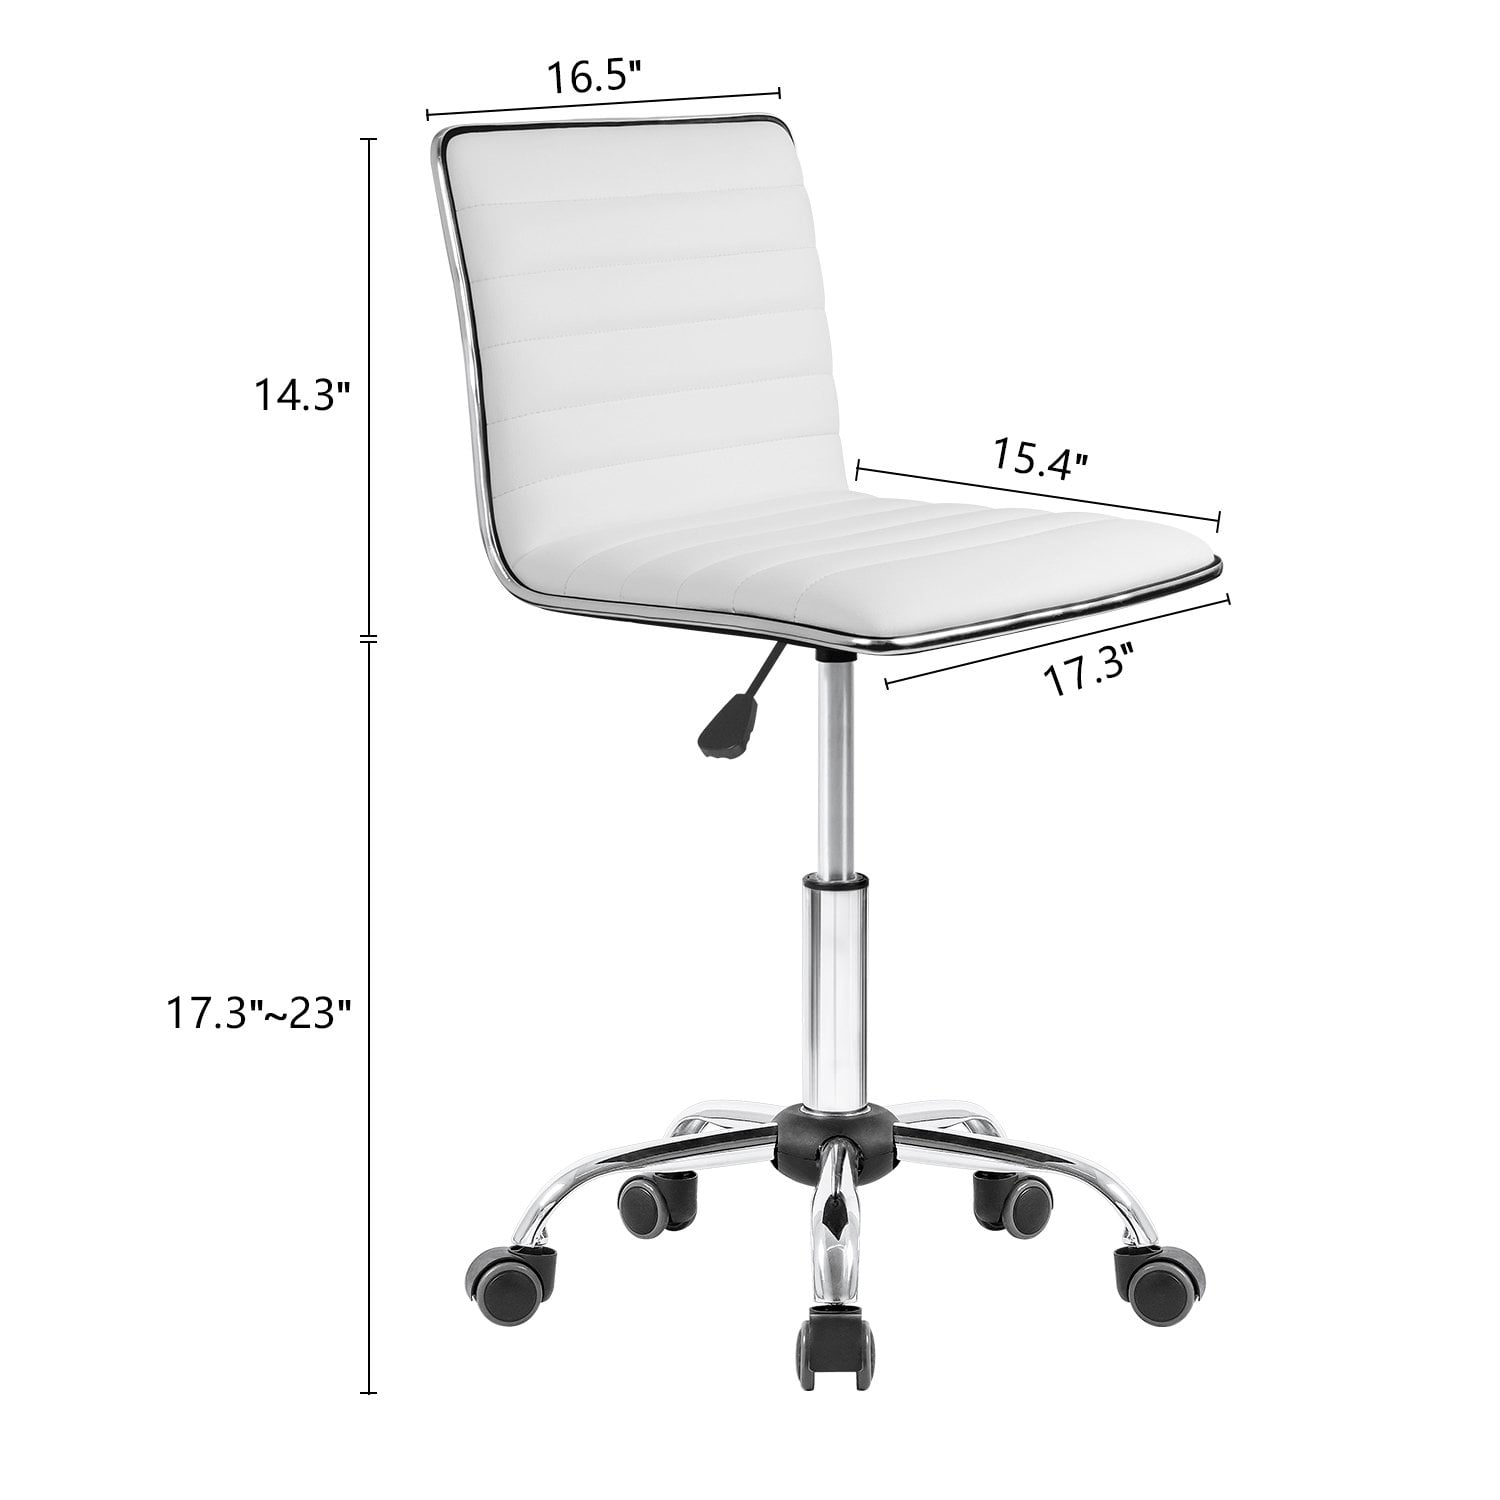 Office Mid-Back Desk Chair Height Adjustable Leather Swivel Task Chair 